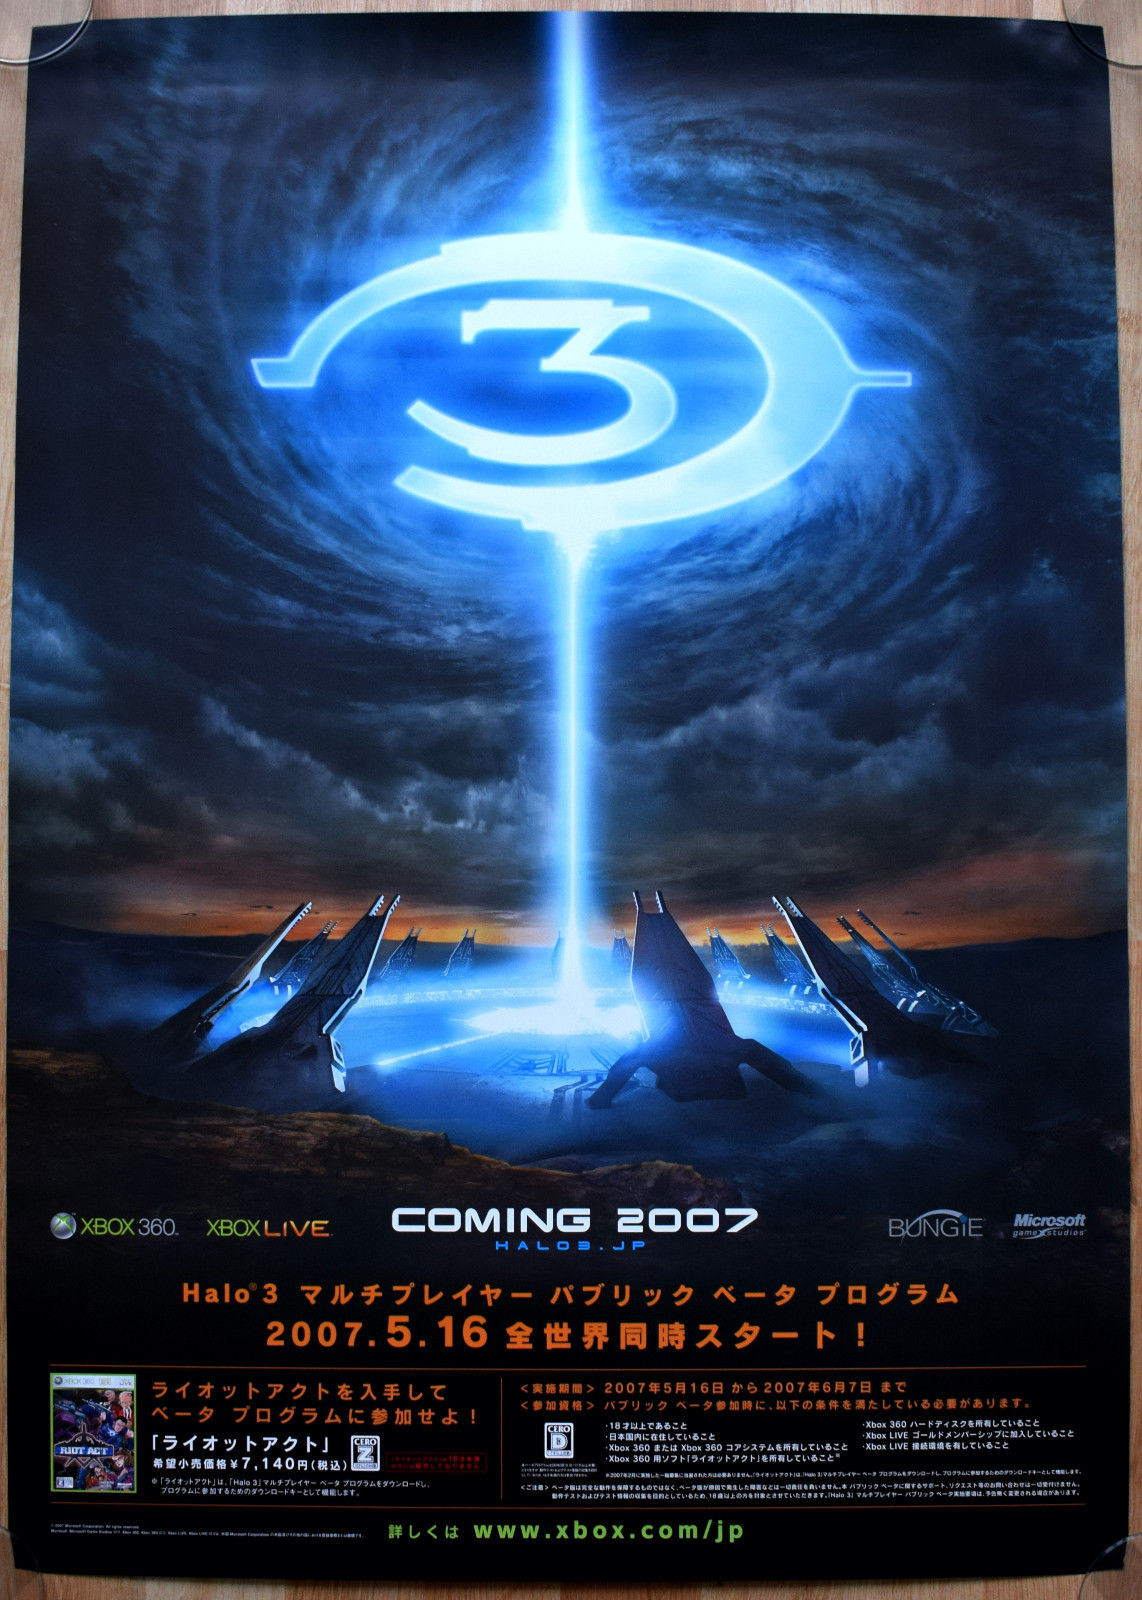 Halo 3 (B2) Japanese Promotional Poster #2